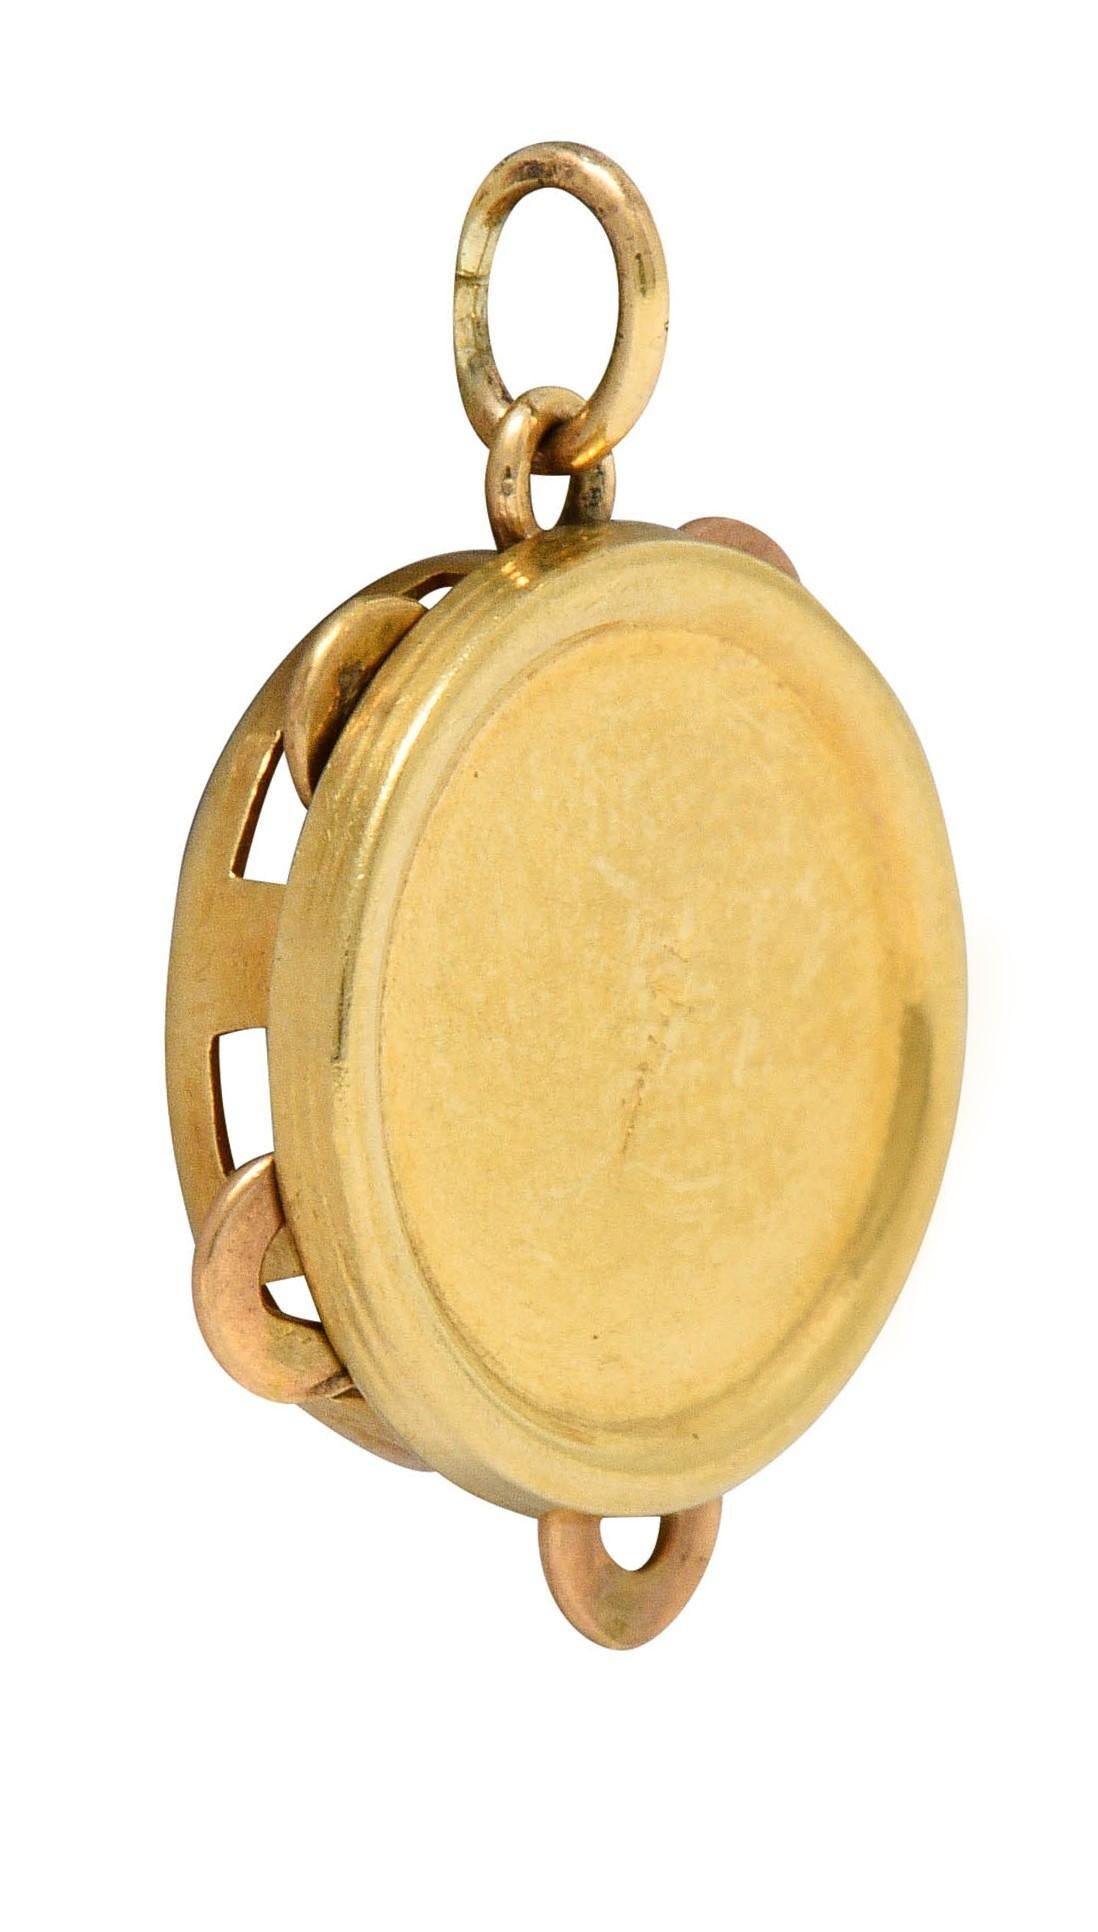 Circular charm is designed as a jingling tambourine

With articulated zills that move and make a slight chime

Completed by a jump ring bale

With maker's mark and stamped 14K for 14 karat gold

Circa: 1940s

Measures: 5/8 x 5/8 inch

Total weight: